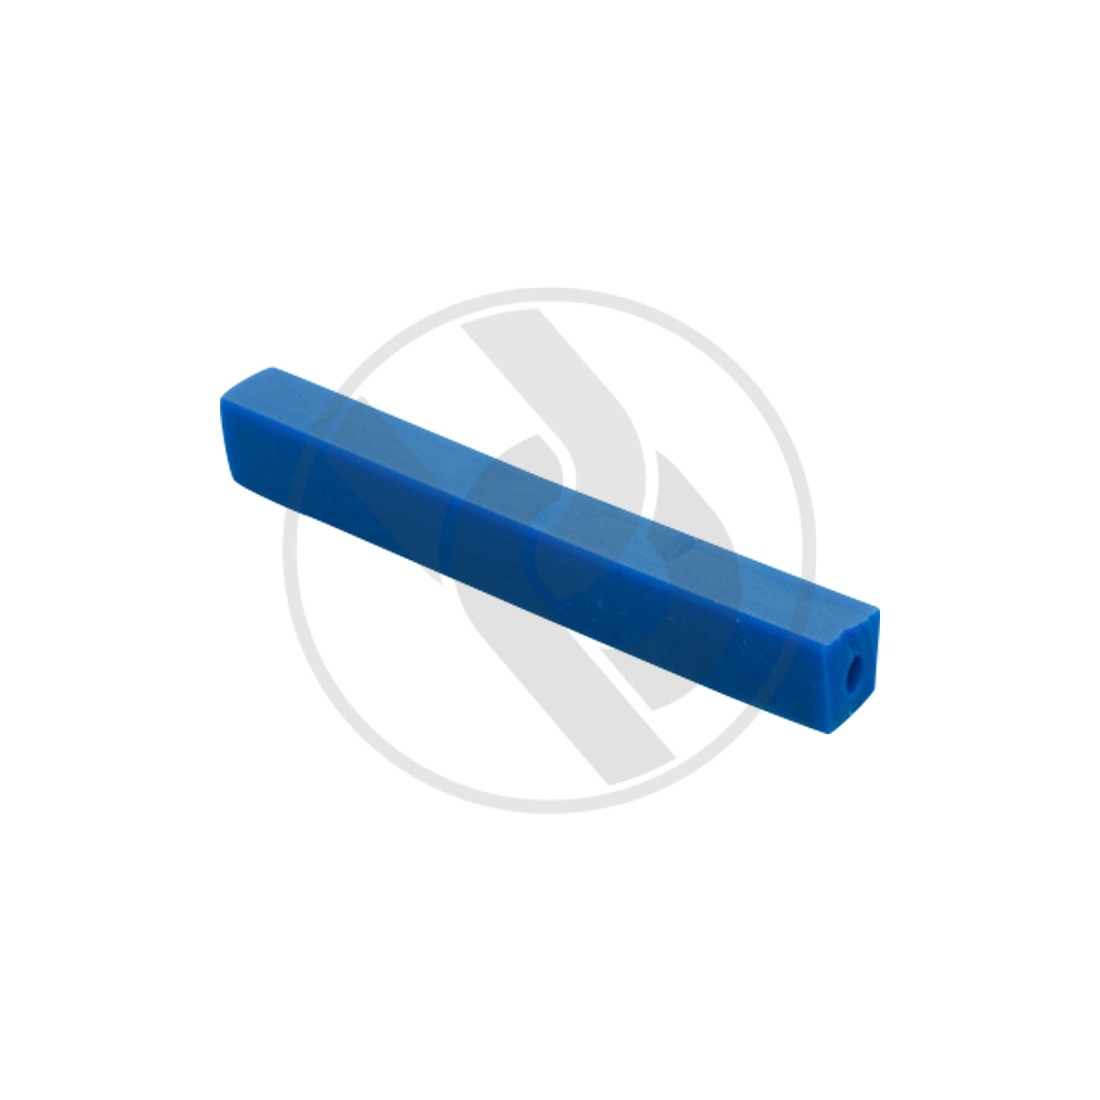 Seal rubber blue, for Proseal